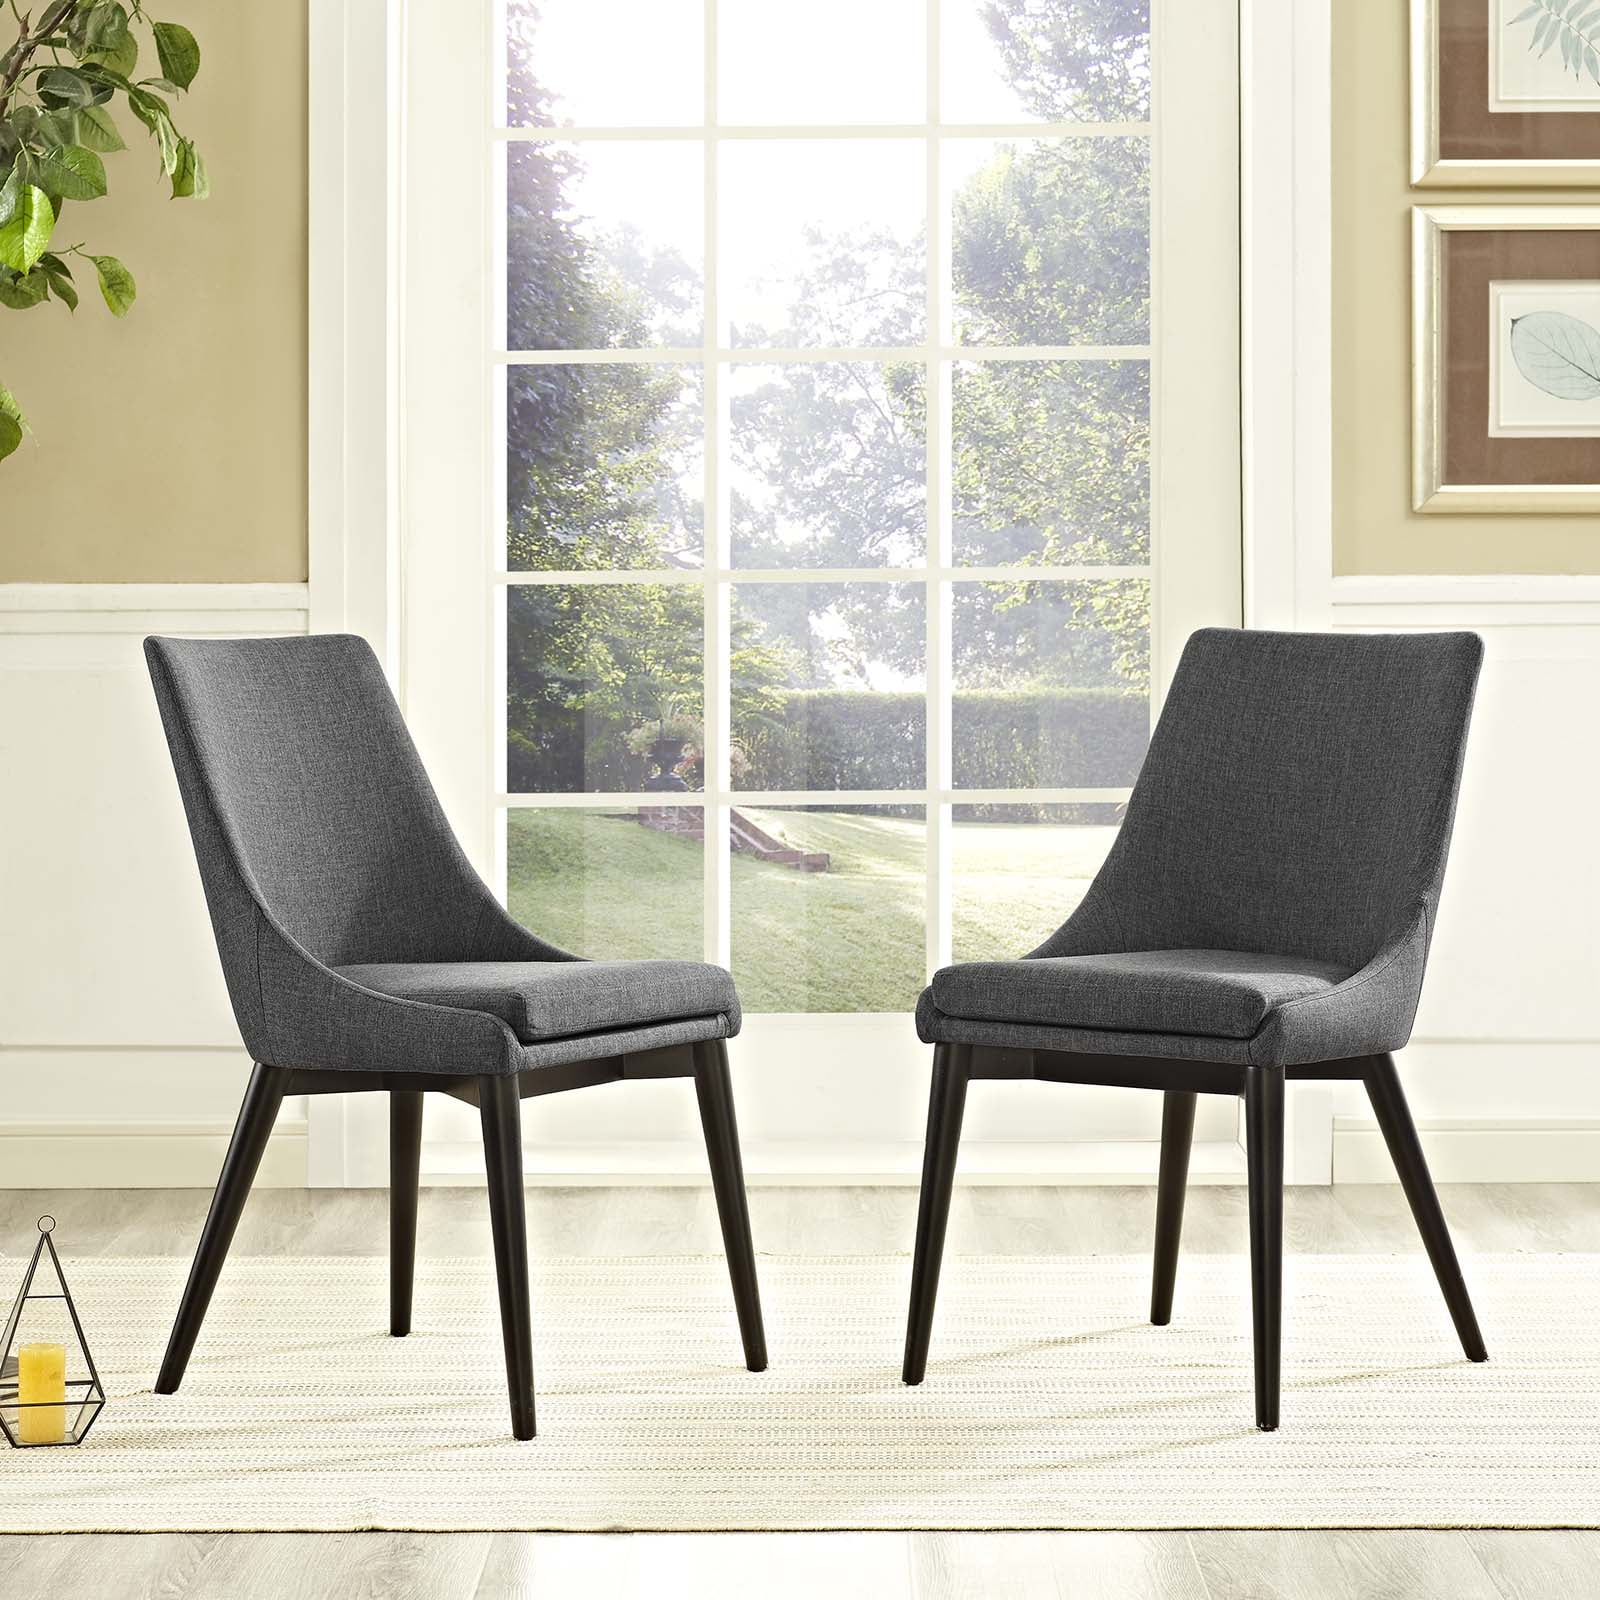 Modway Viscount Fabric Dining Side Chair, Set of 2, Multiple Colors ...